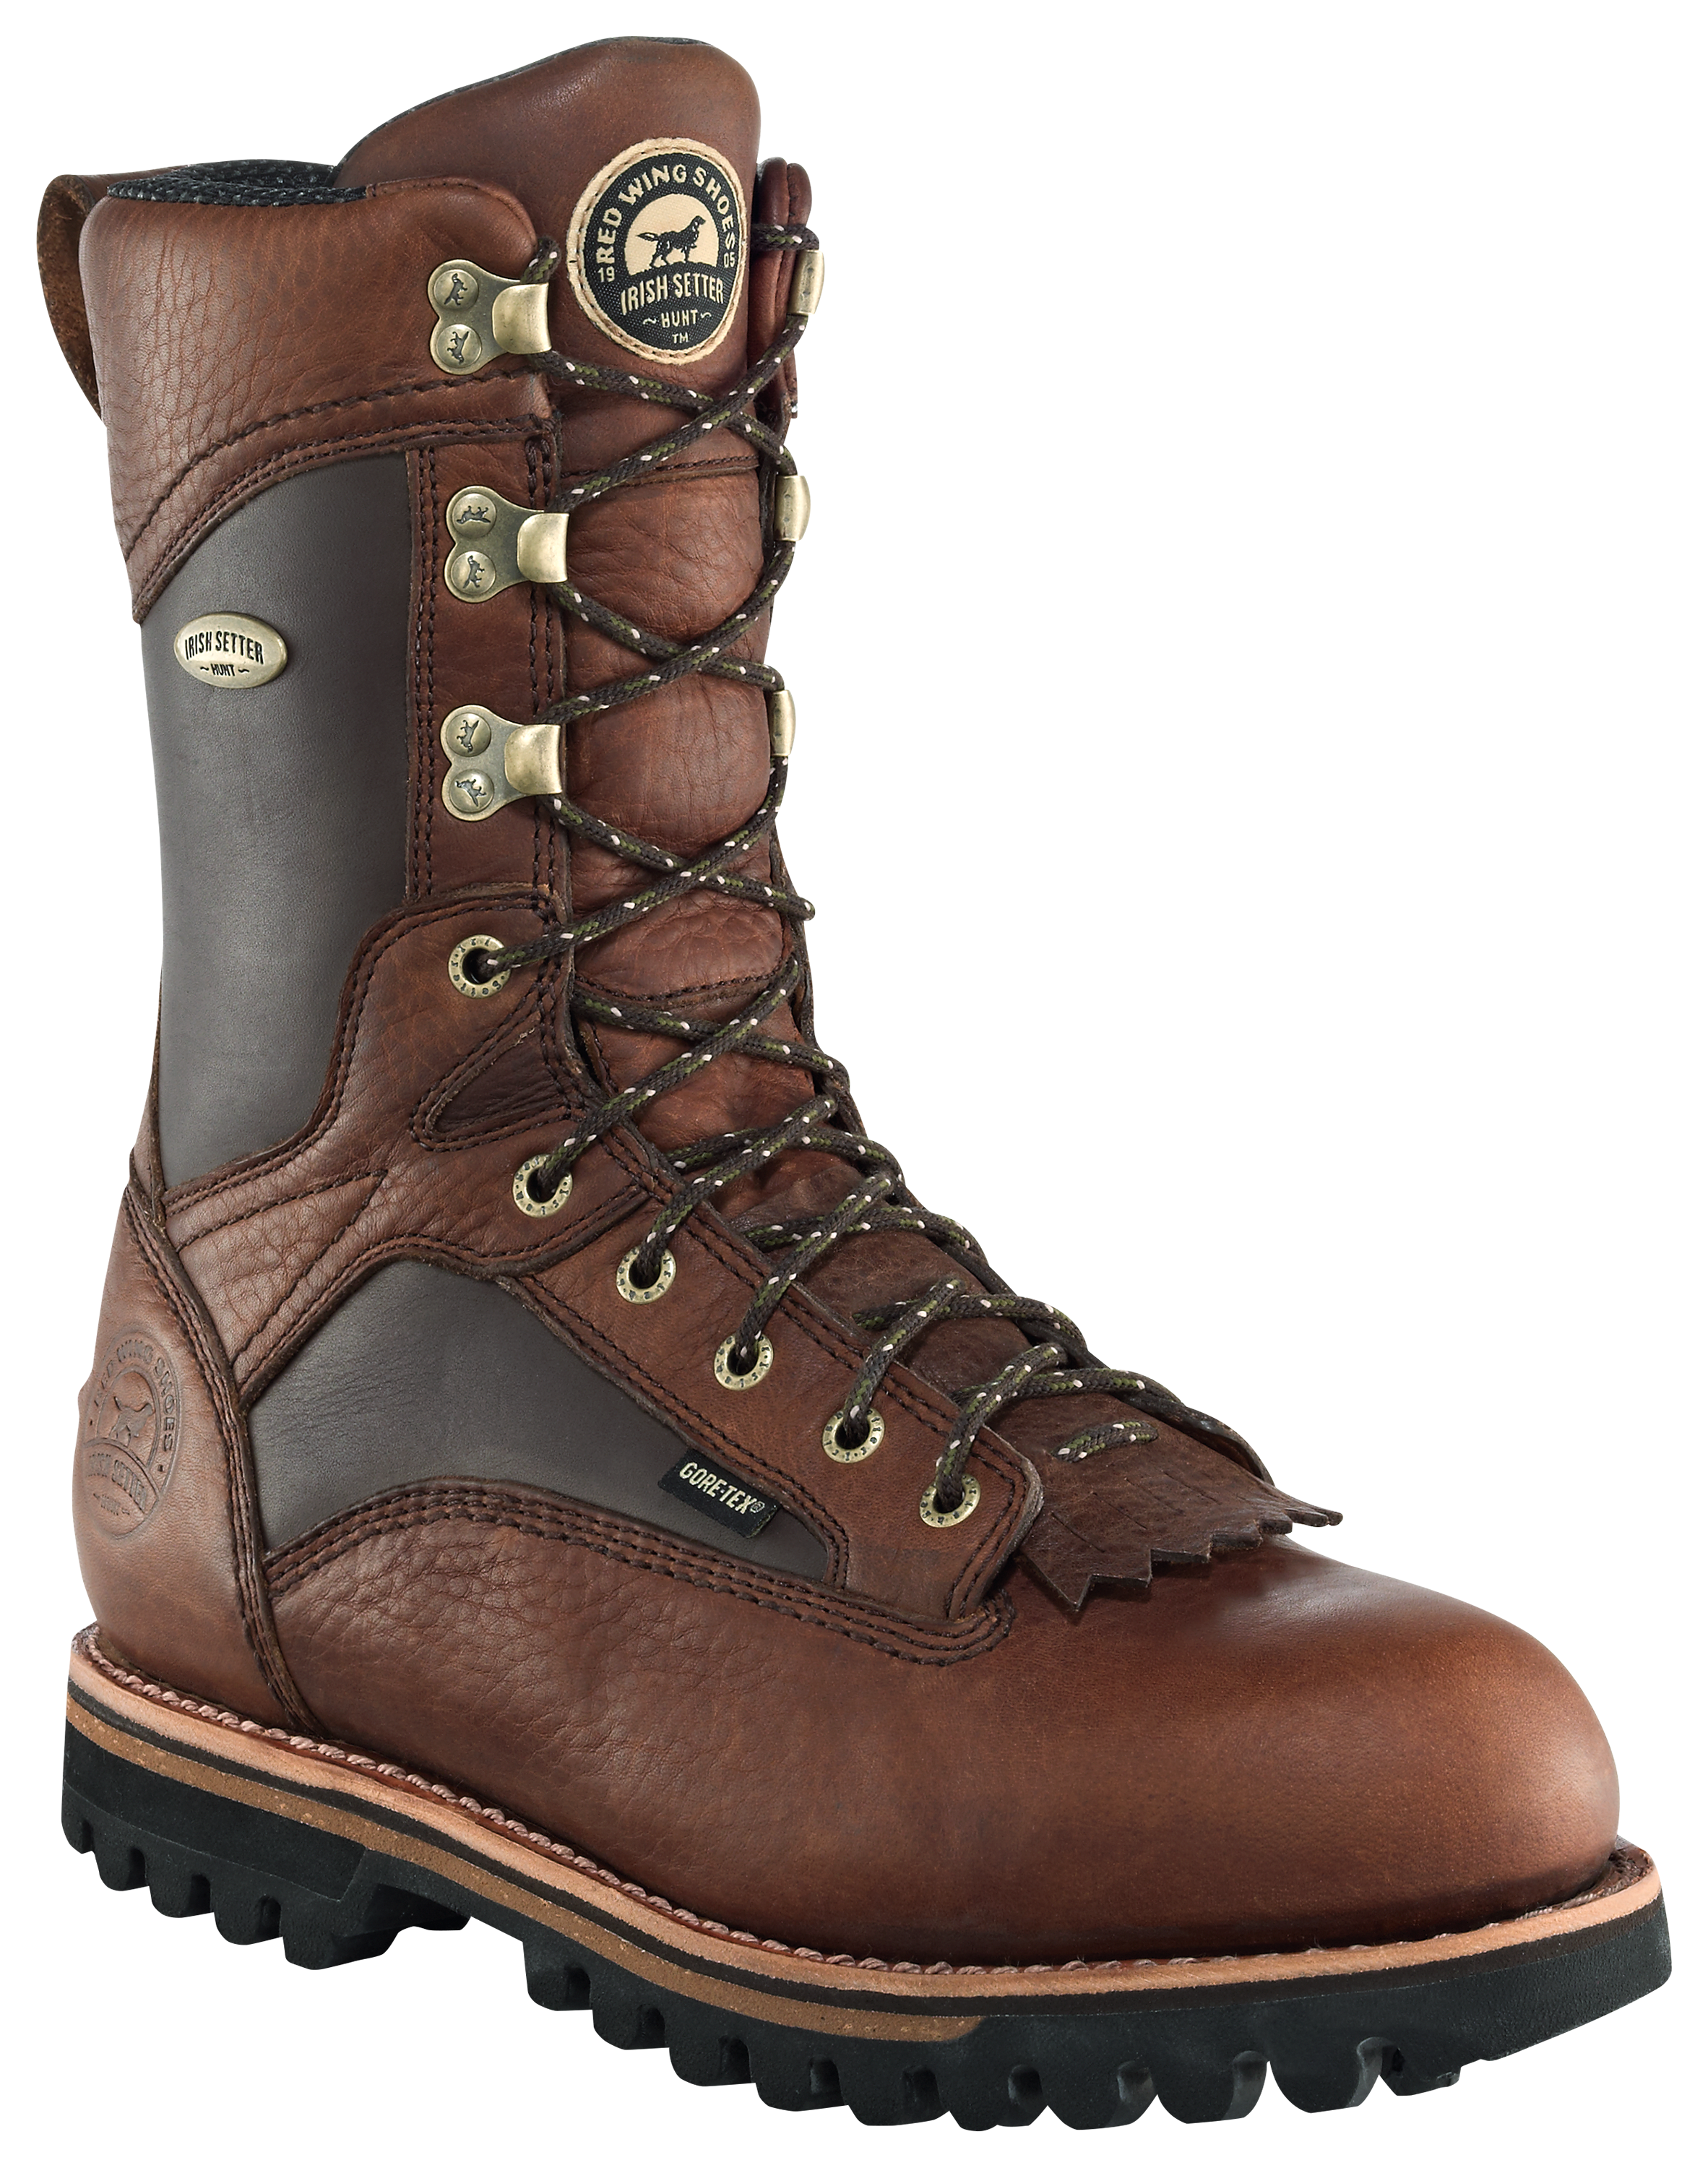 Irish Setter Elk Tracker 12'' 600 Gram Thinsulate Insulated Waterproof Hunting Boots for Men - Brown - 8.5 Wide EE